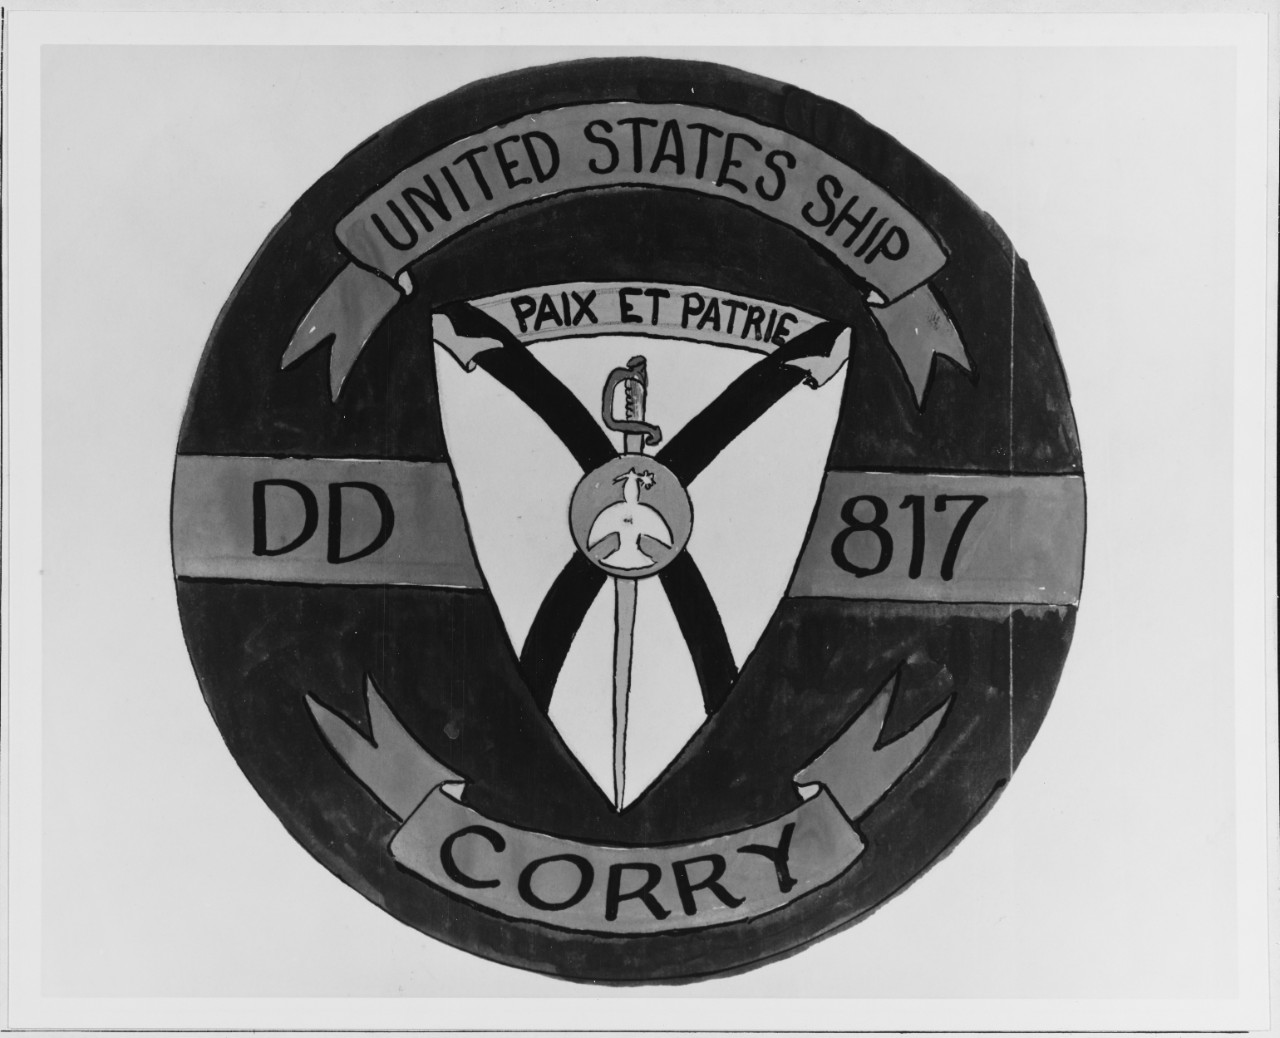 The ship’s insignia following her reclassification back to a destroyer, 1 January 1964. Naval History and Heritage Command Photograph NH 65846-KN)